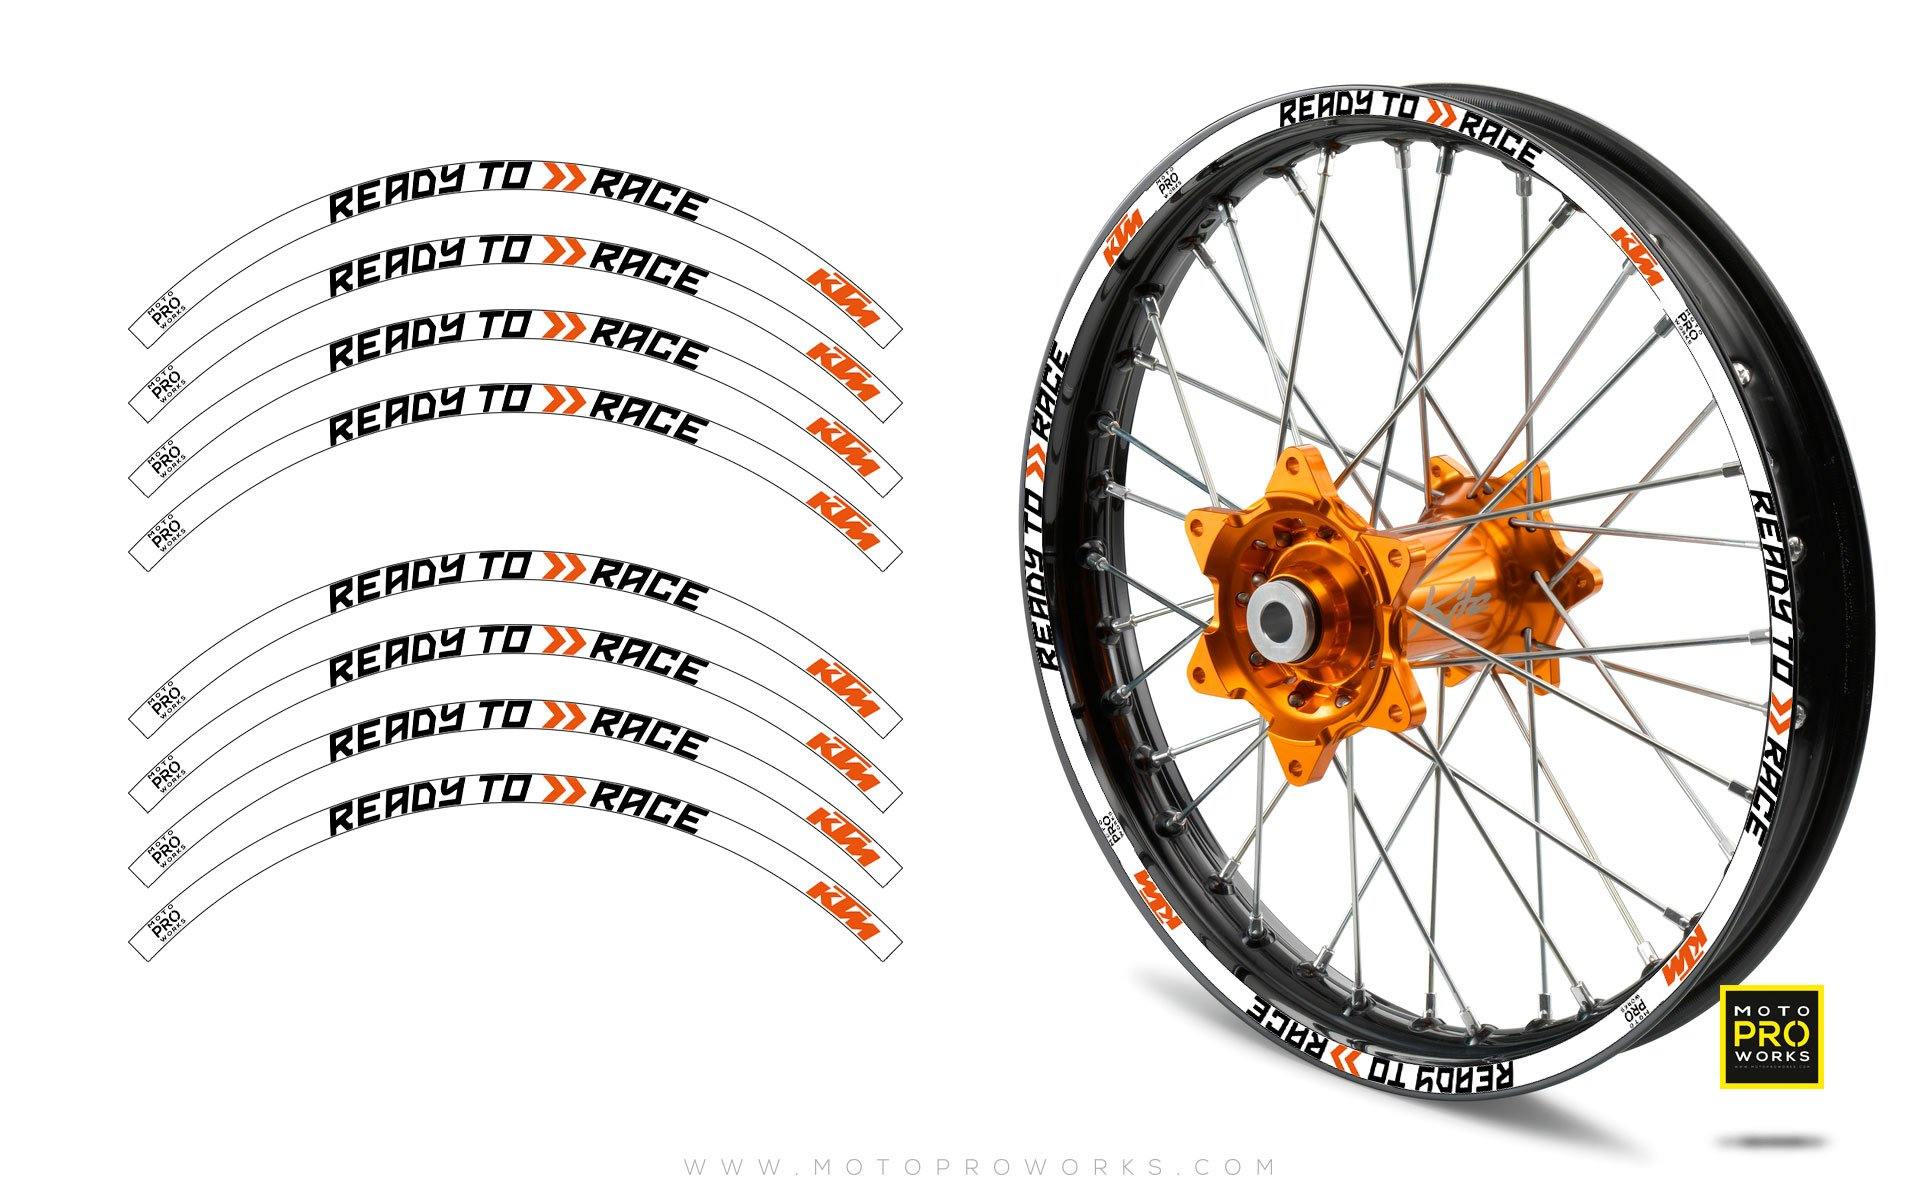 Rim Stripes - KTM "Ready To Race" (White) - MotoProWorks | Decals and Bike Graphic kit